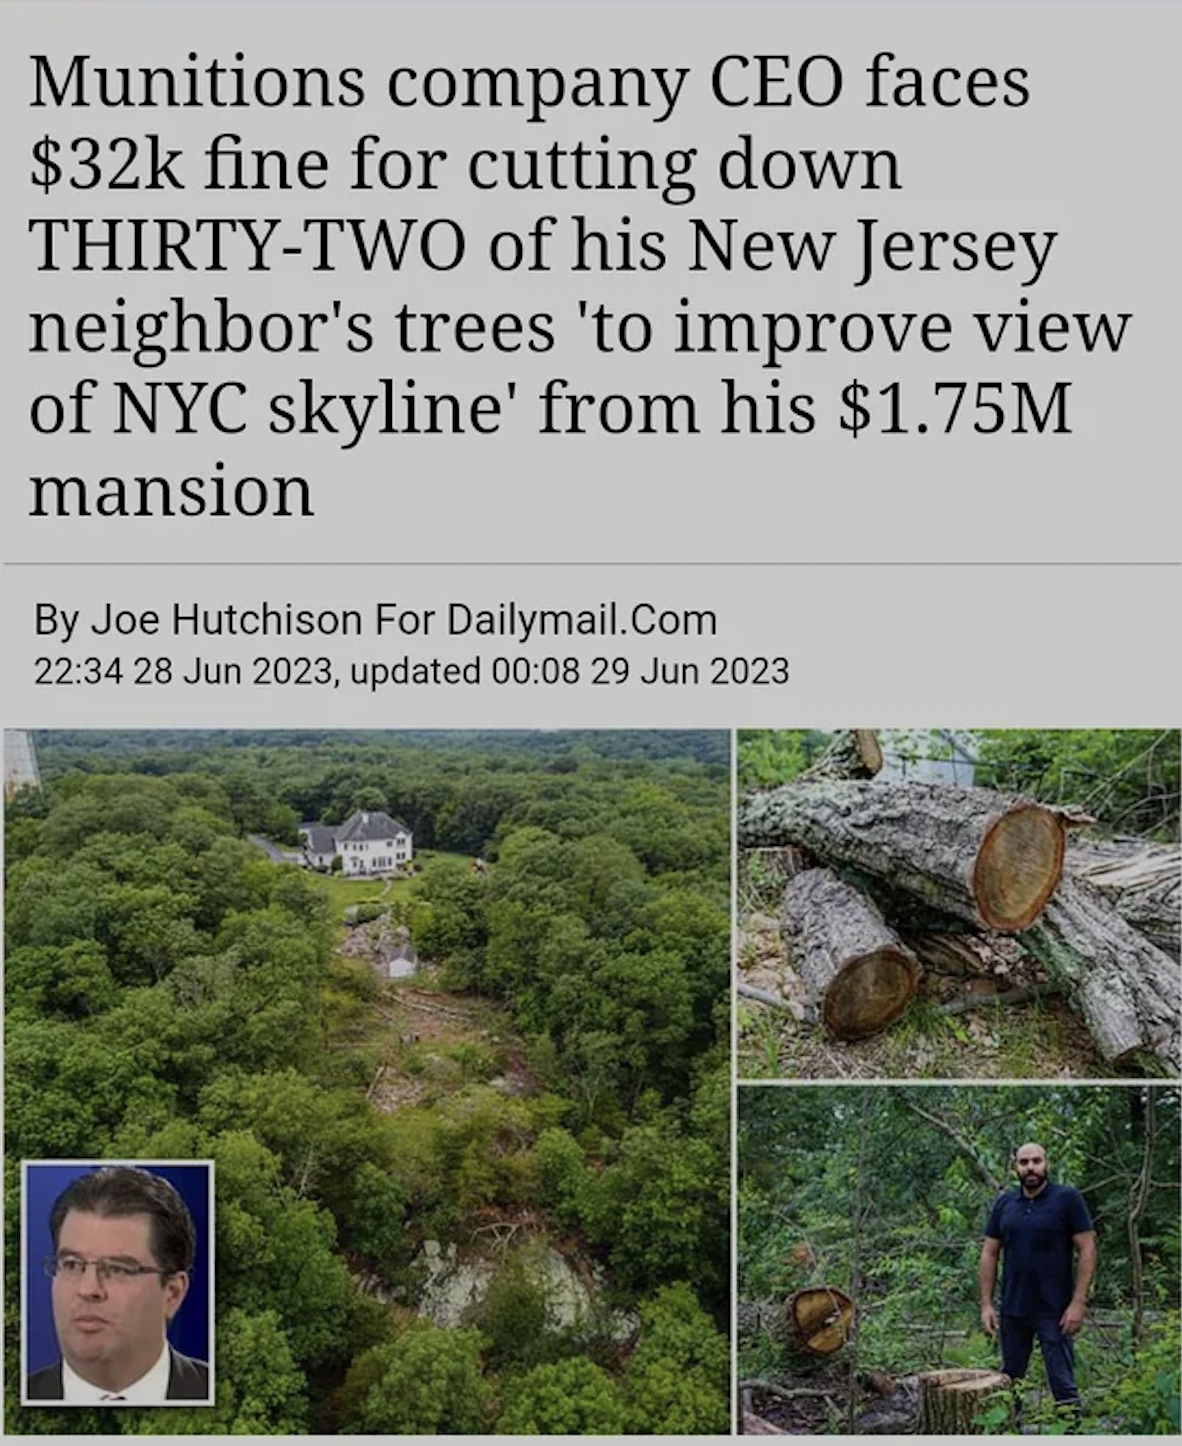 nature reserve - Munitions company Ceo faces $32k fine for cutting down ThirtyTwo of his New Jersey neighbor's trees 'to improve view of Nyc skyline' from his $1.75M mansion By Joe Hutchison For Dailymail.Com , updated